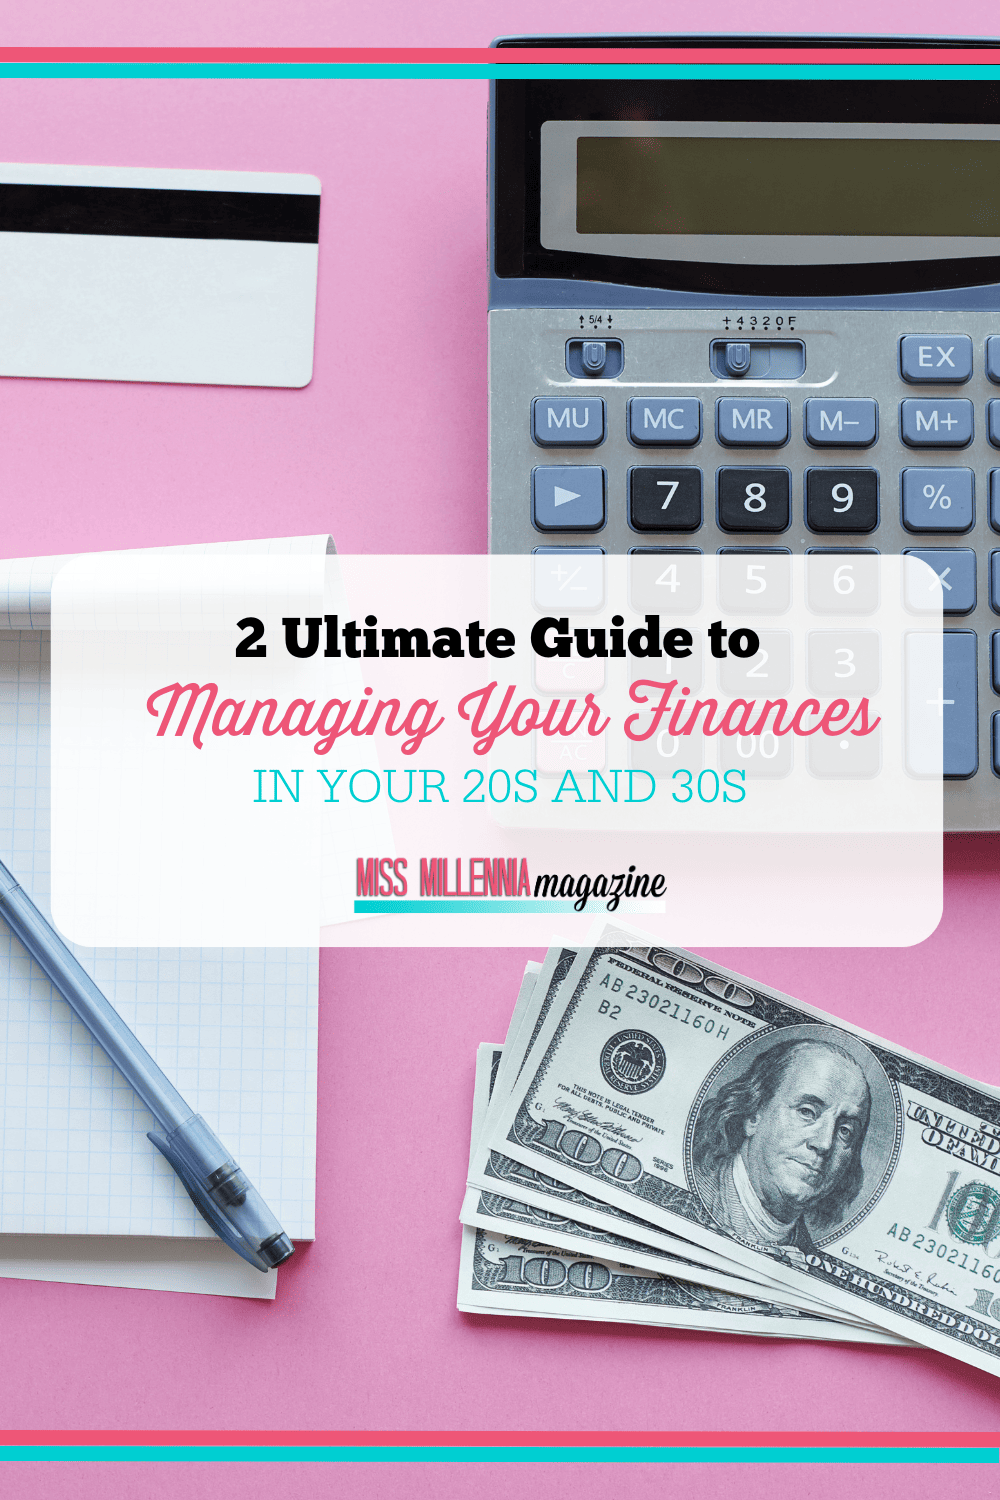 2 Ultimate Guide to Managing Your Finances in Your 20s and 30s